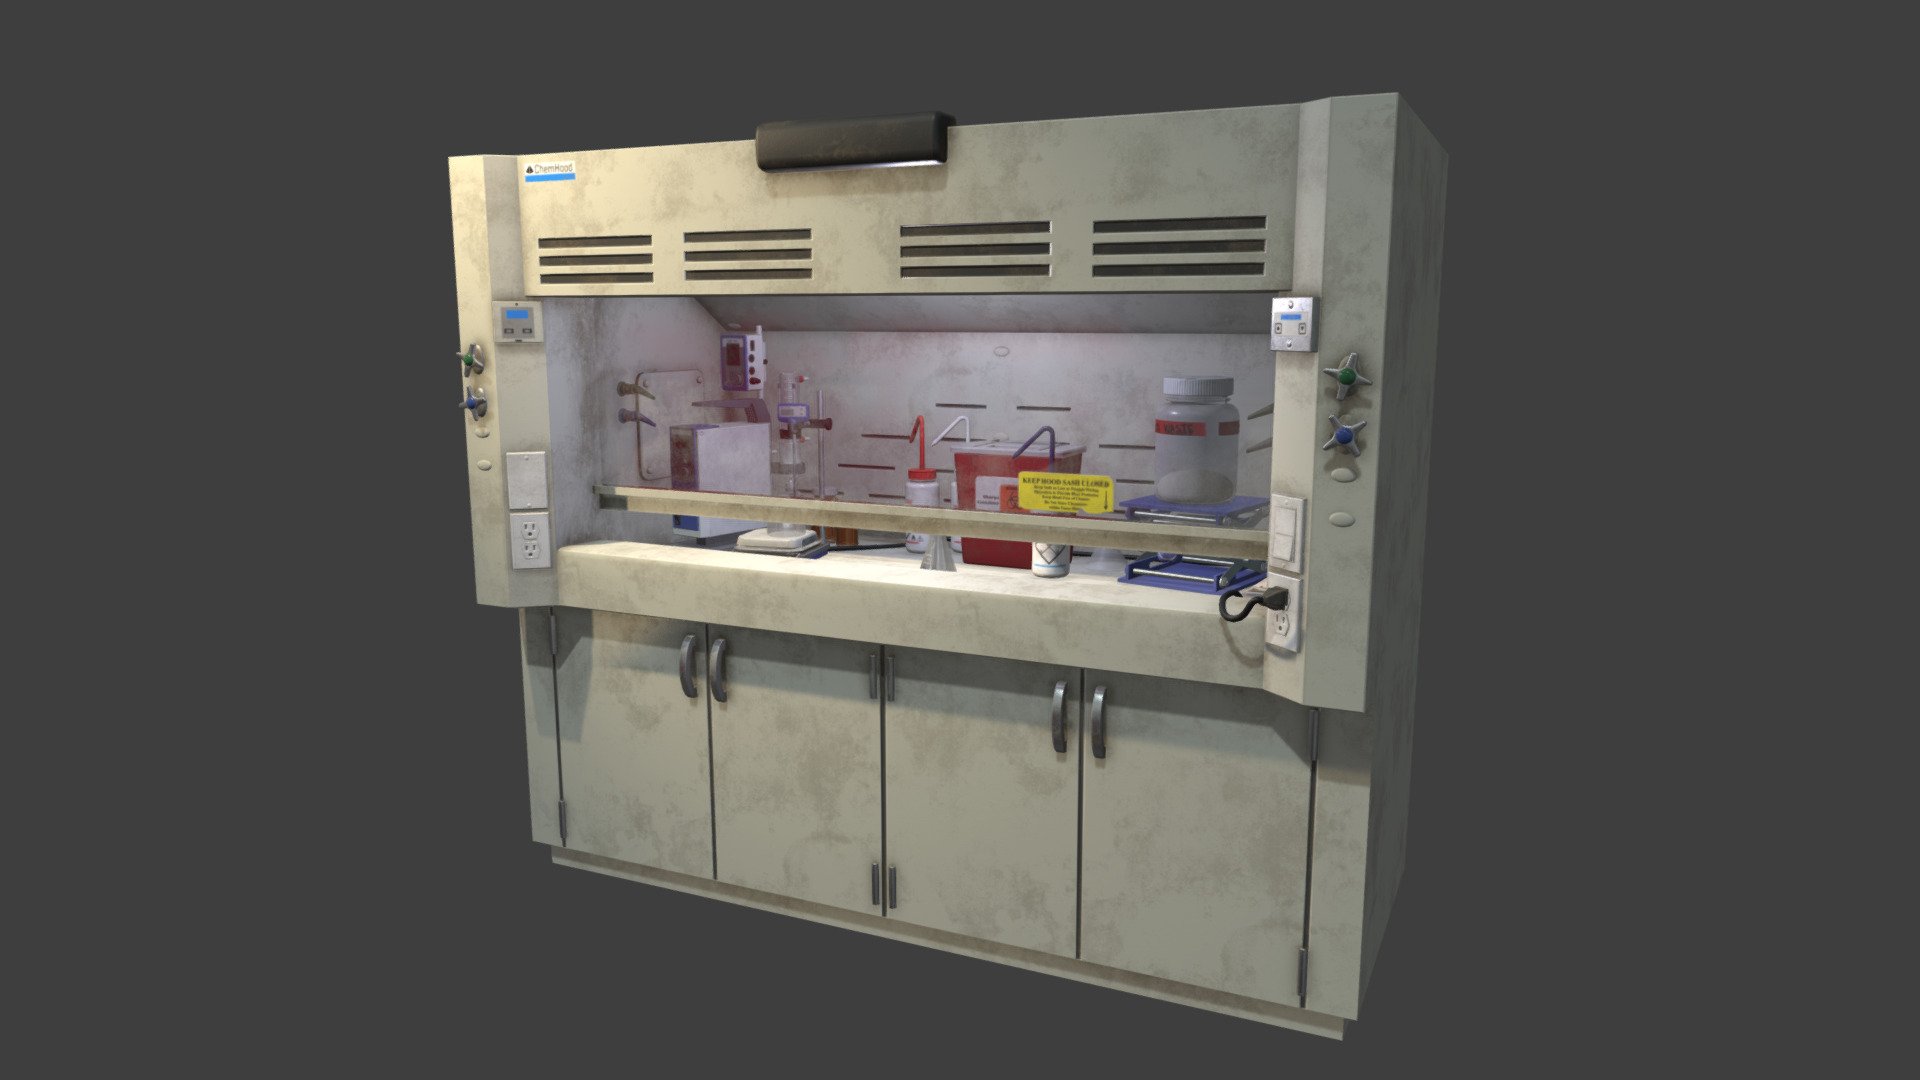 Lab scene I did to practice more realistic props. I wanted to practice stuff I'm not super familiar with, since my partner is a chemist I had him take some pictures of his fume hood for inspiration. It was nice learning more about the stuff he uses in the lab 3d model